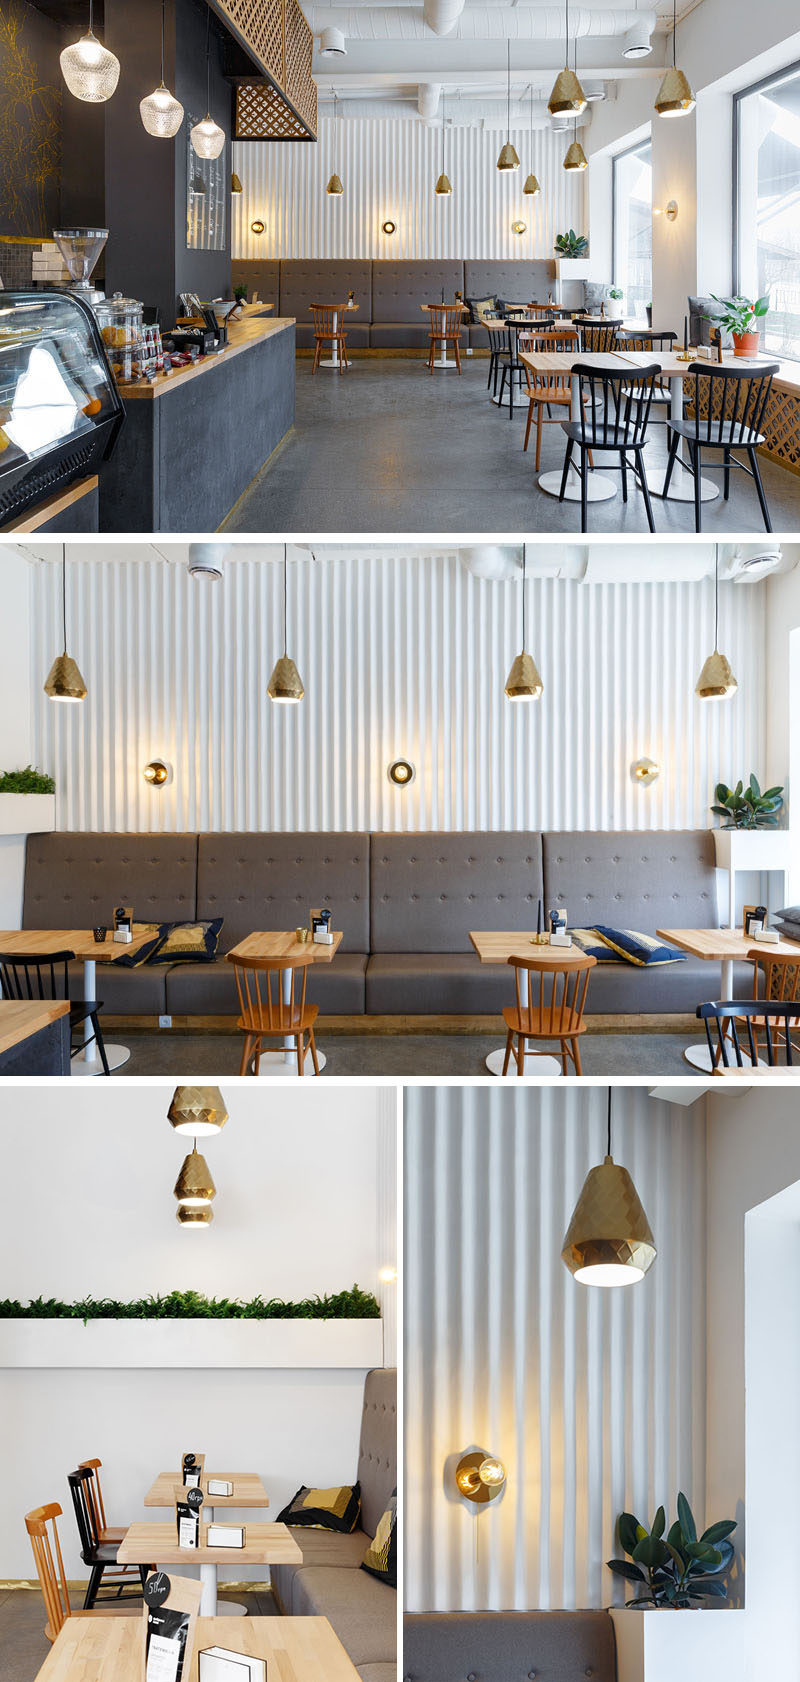 In this modern coffee shop, gold has been carried through the space with simple gold pendant lights that hang above the tables. A corrugated white wall and upholstered grey banquettes add texture to the space, while the wood tables and chairs tie in with the wood countertops.